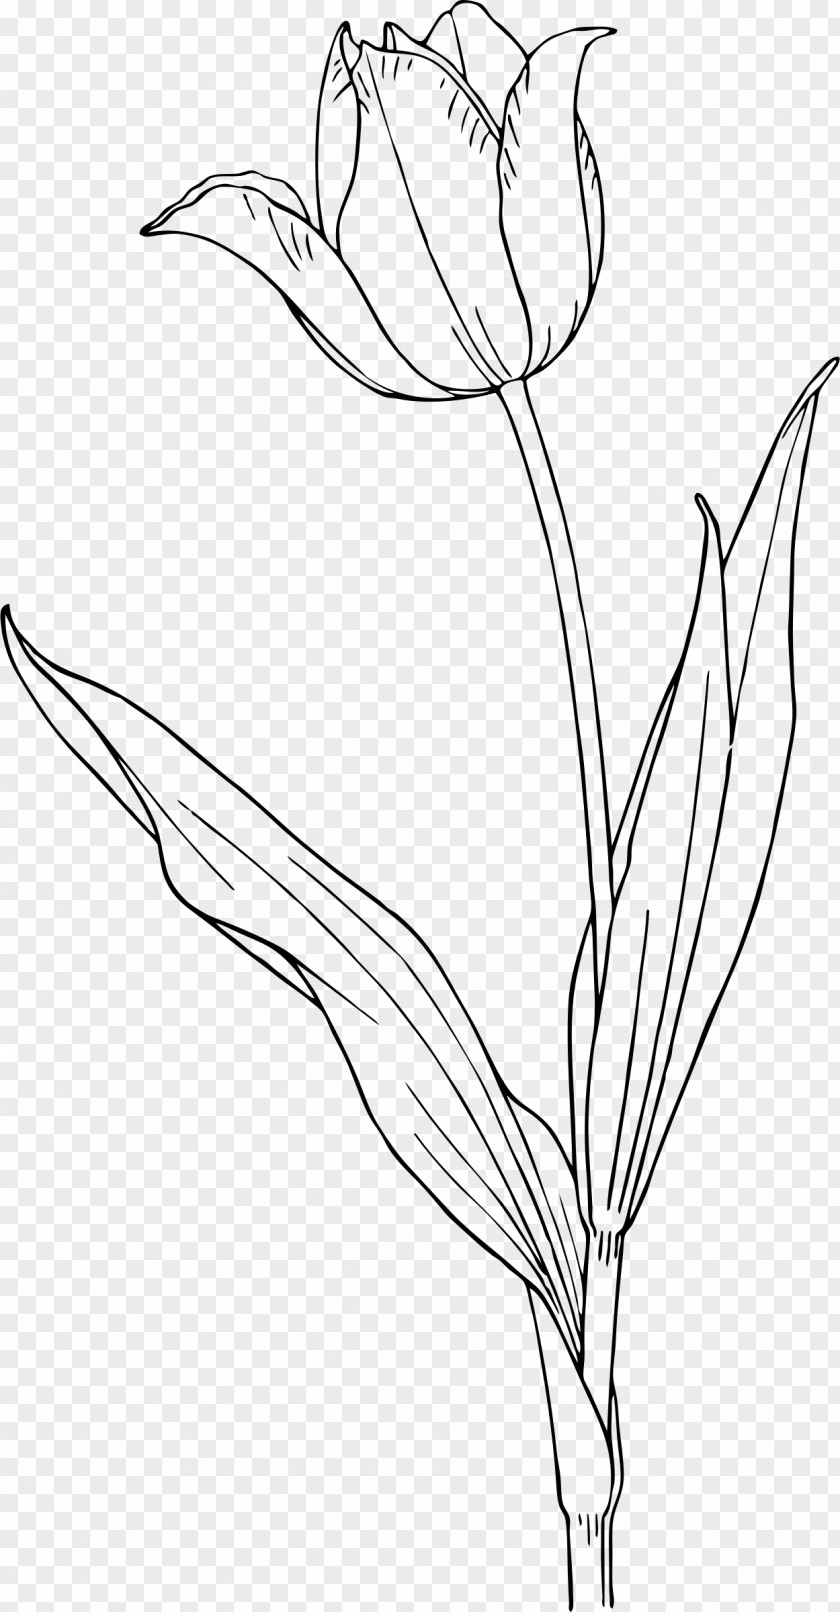 Tulip Nature Drawing And Design; Clip Art PNG